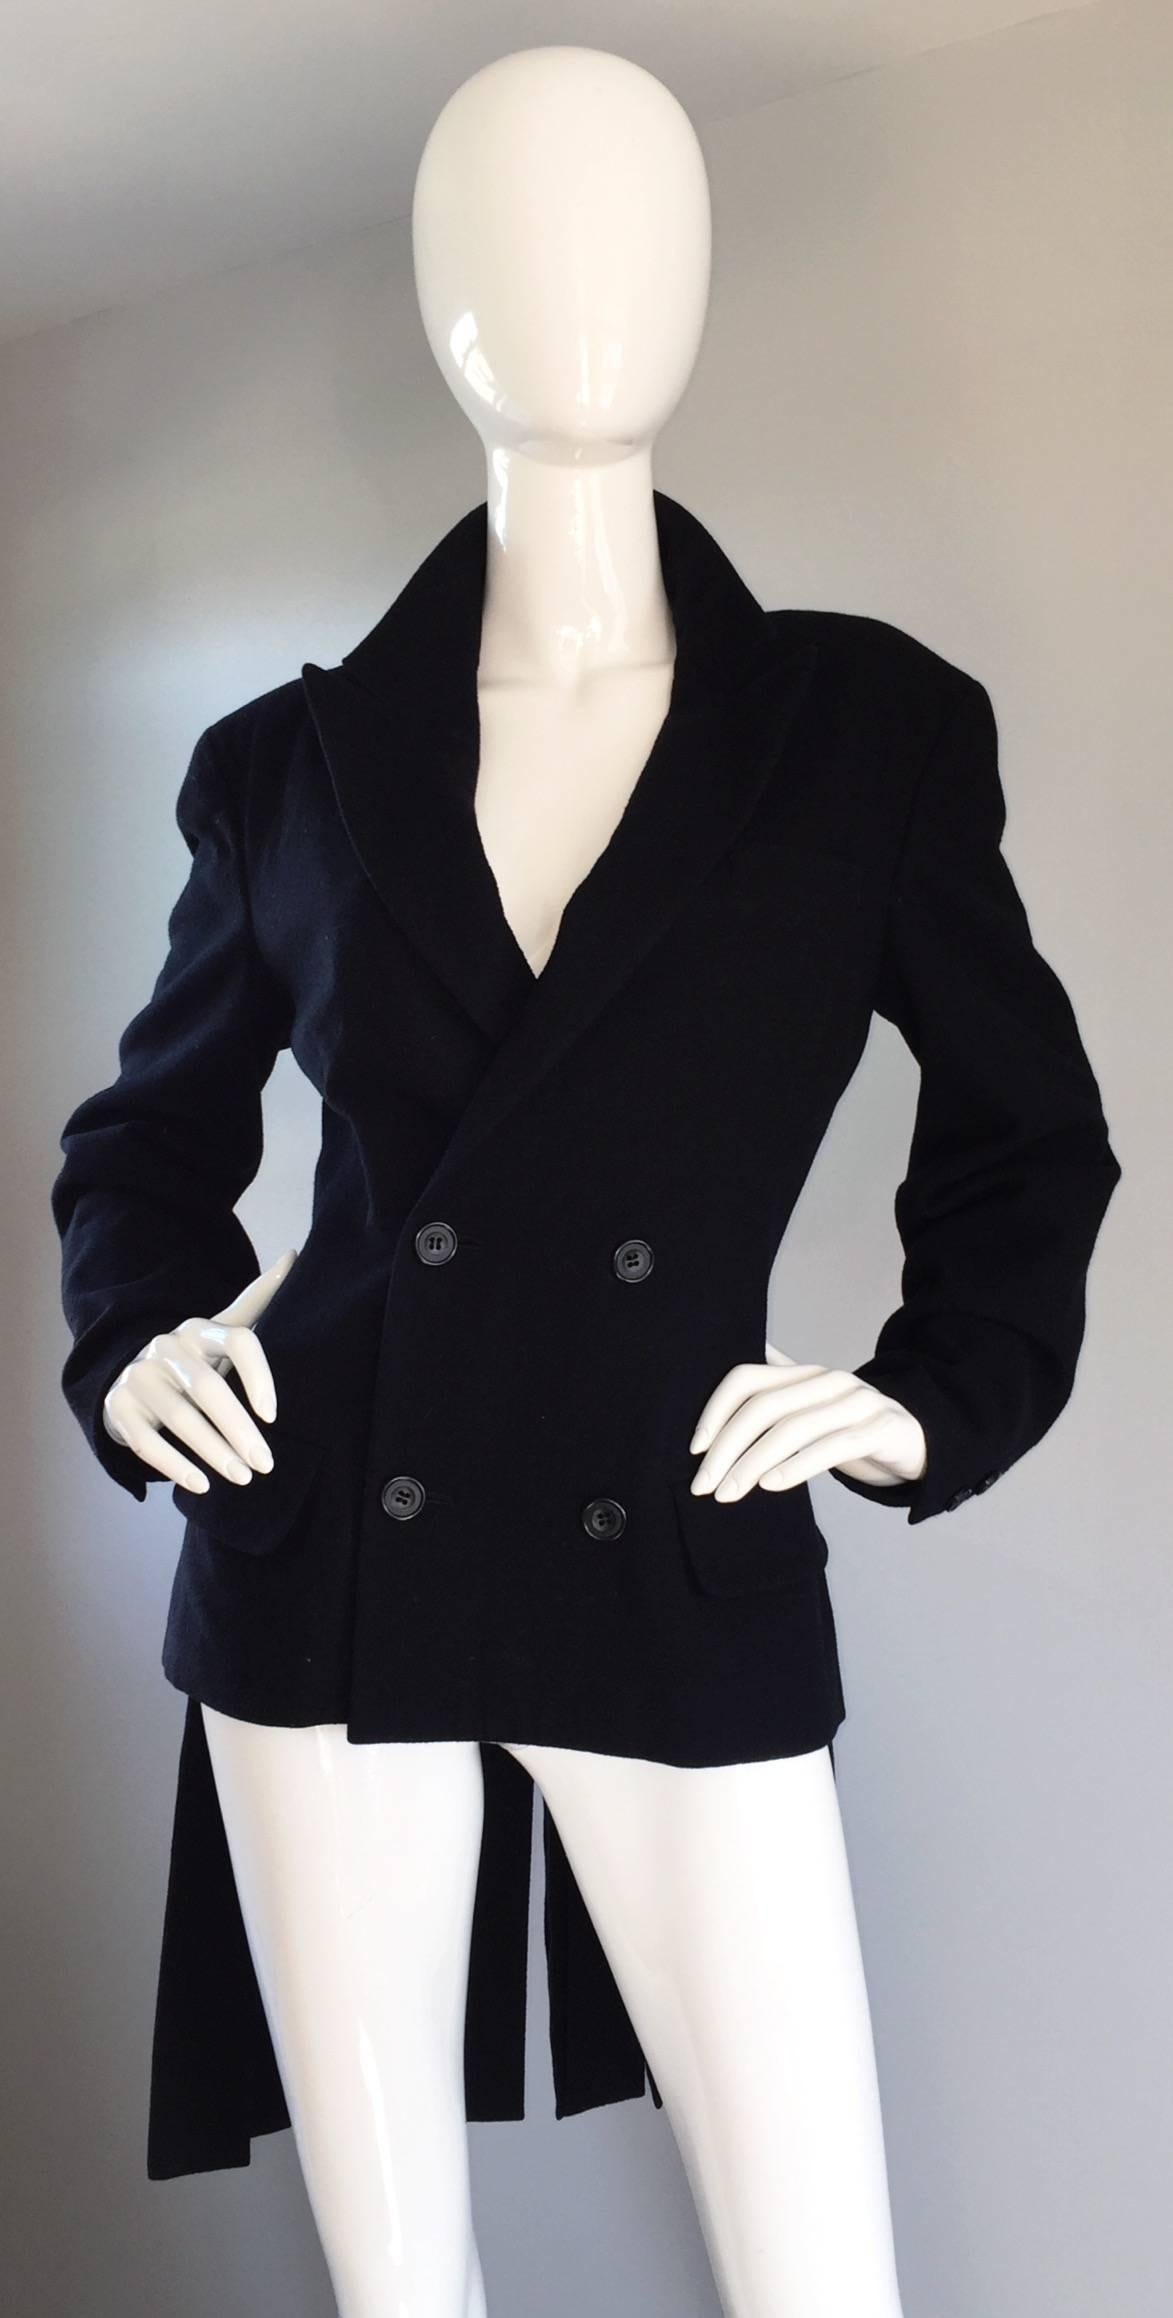 Rare Early Yohji Yamamoto Black Wool ' Carwash Hem ' Vintage Jacket / Blazer In Excellent Condition For Sale In San Diego, CA